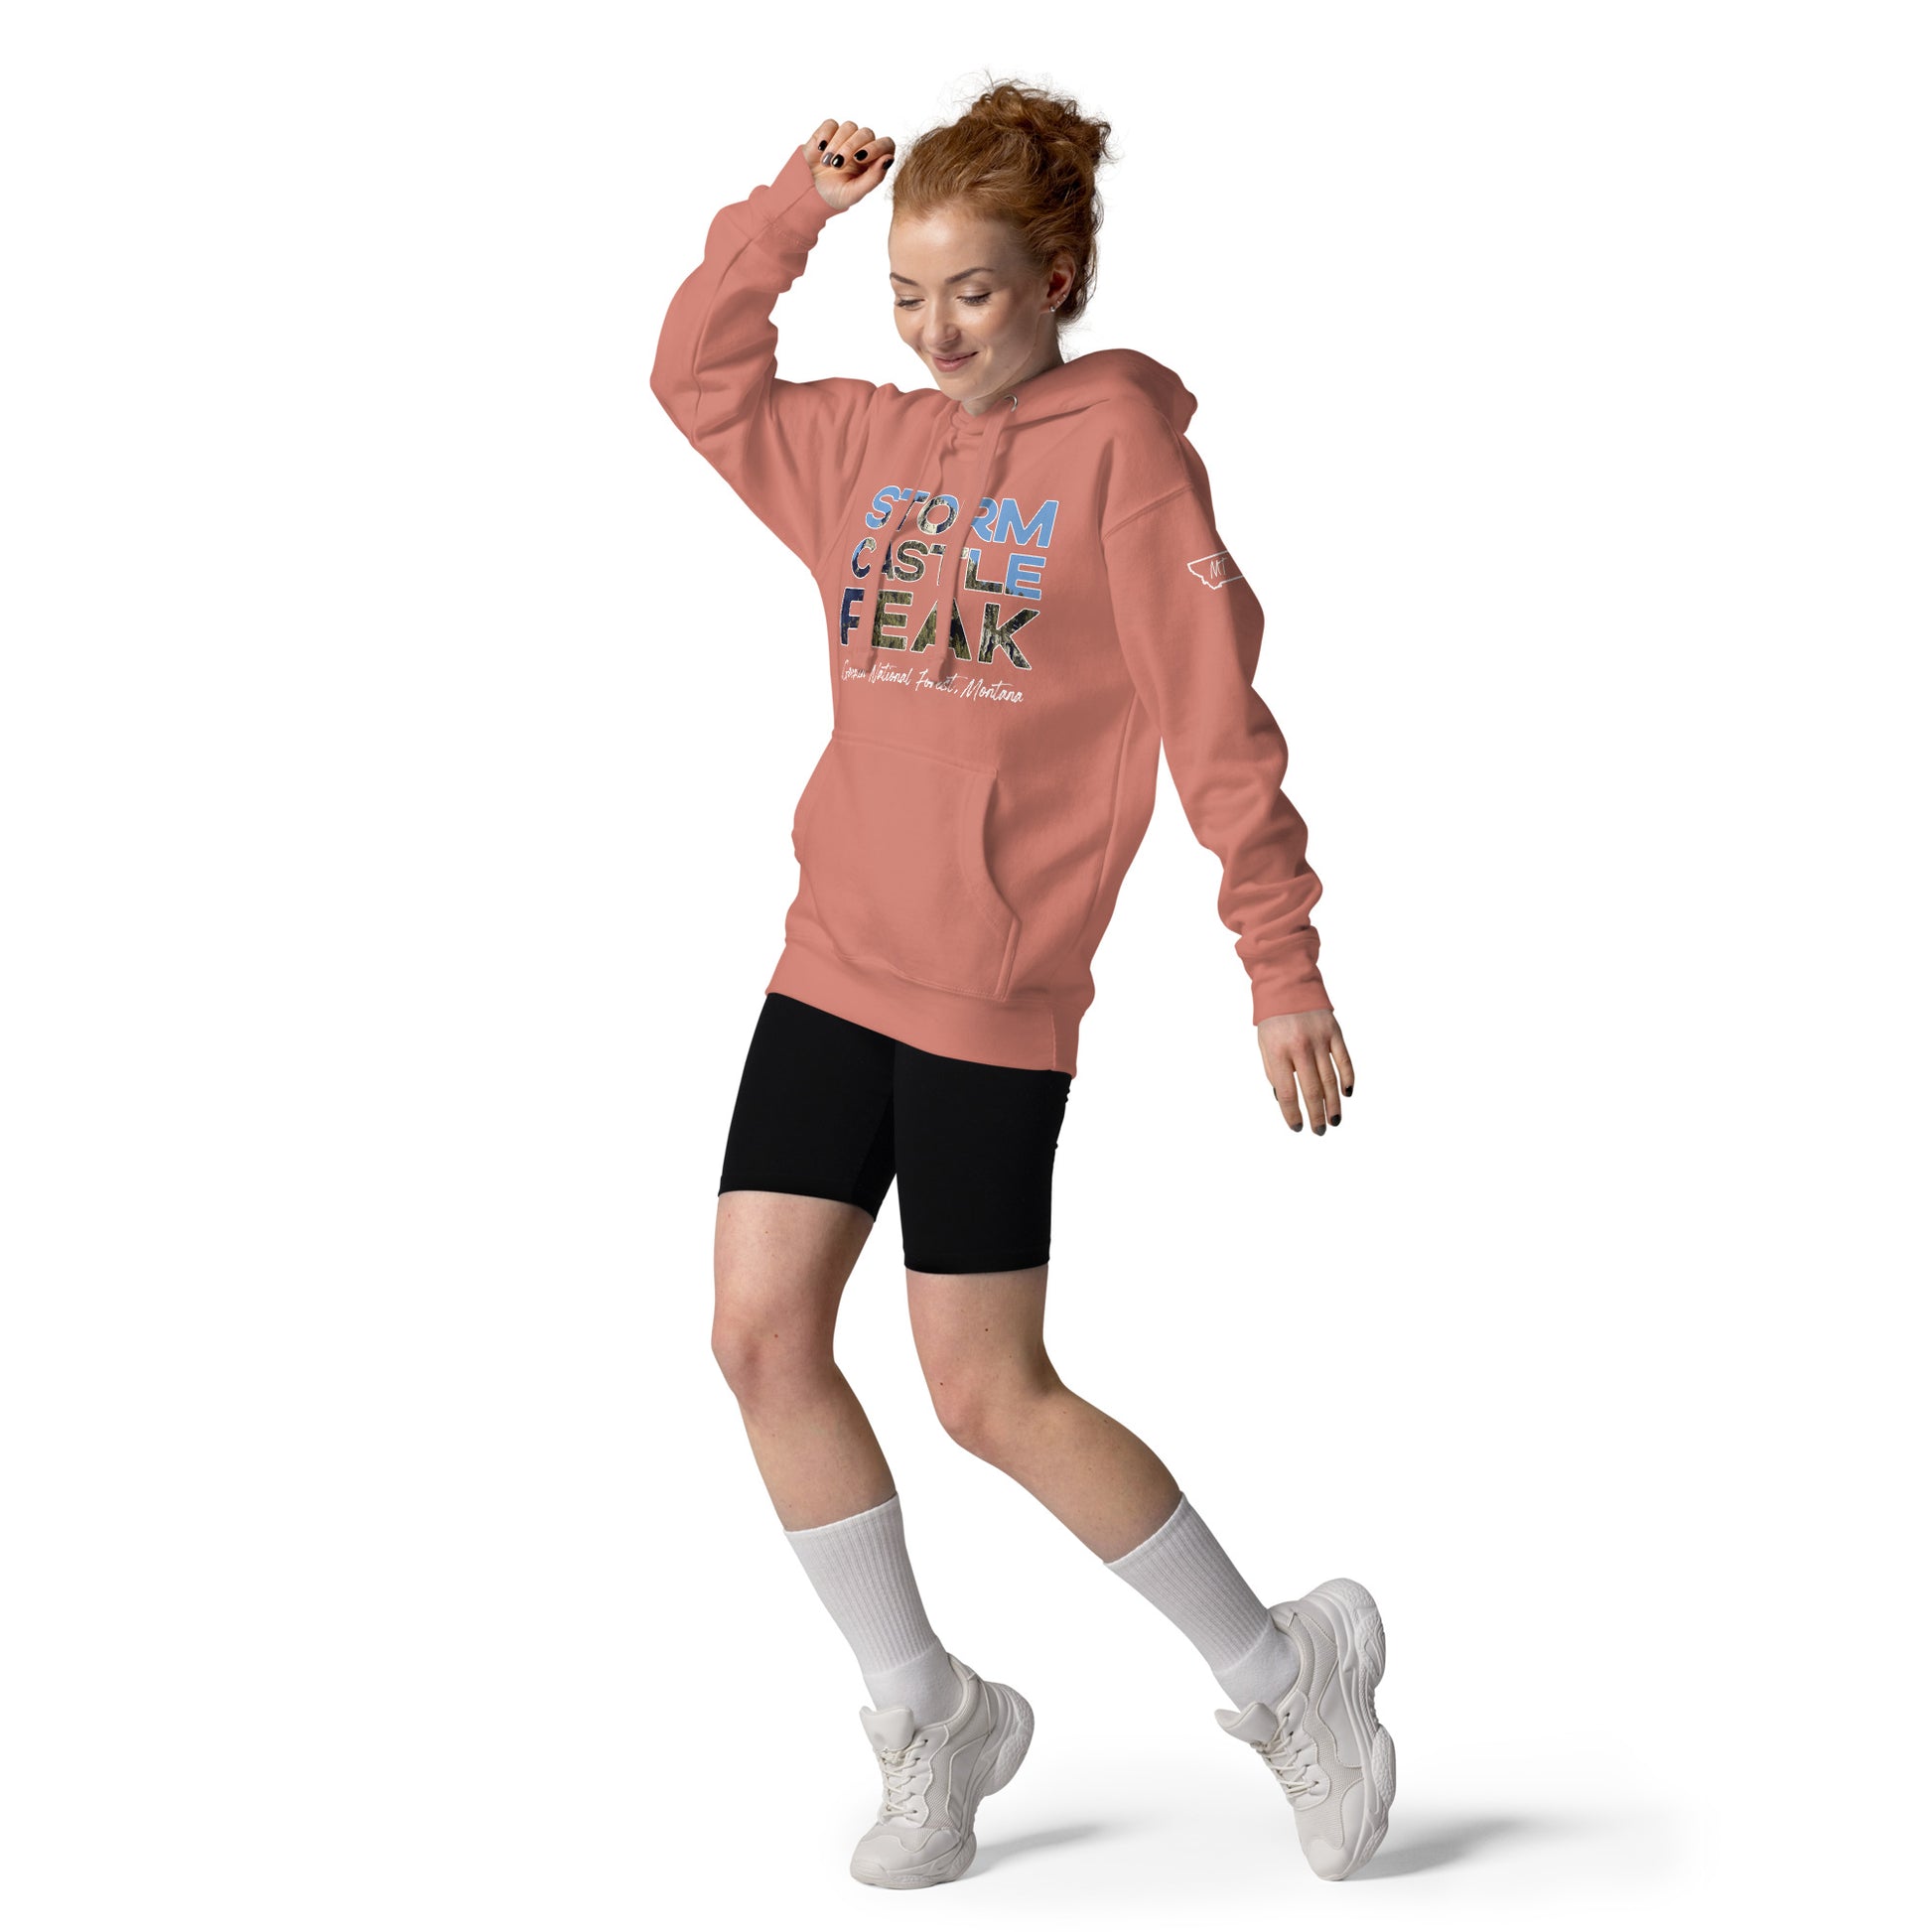 Front-Side view of Storm Castle Peak in Custer Gallatin National Forest Montana Dusty Rose Women's Hoodie from Park Attire